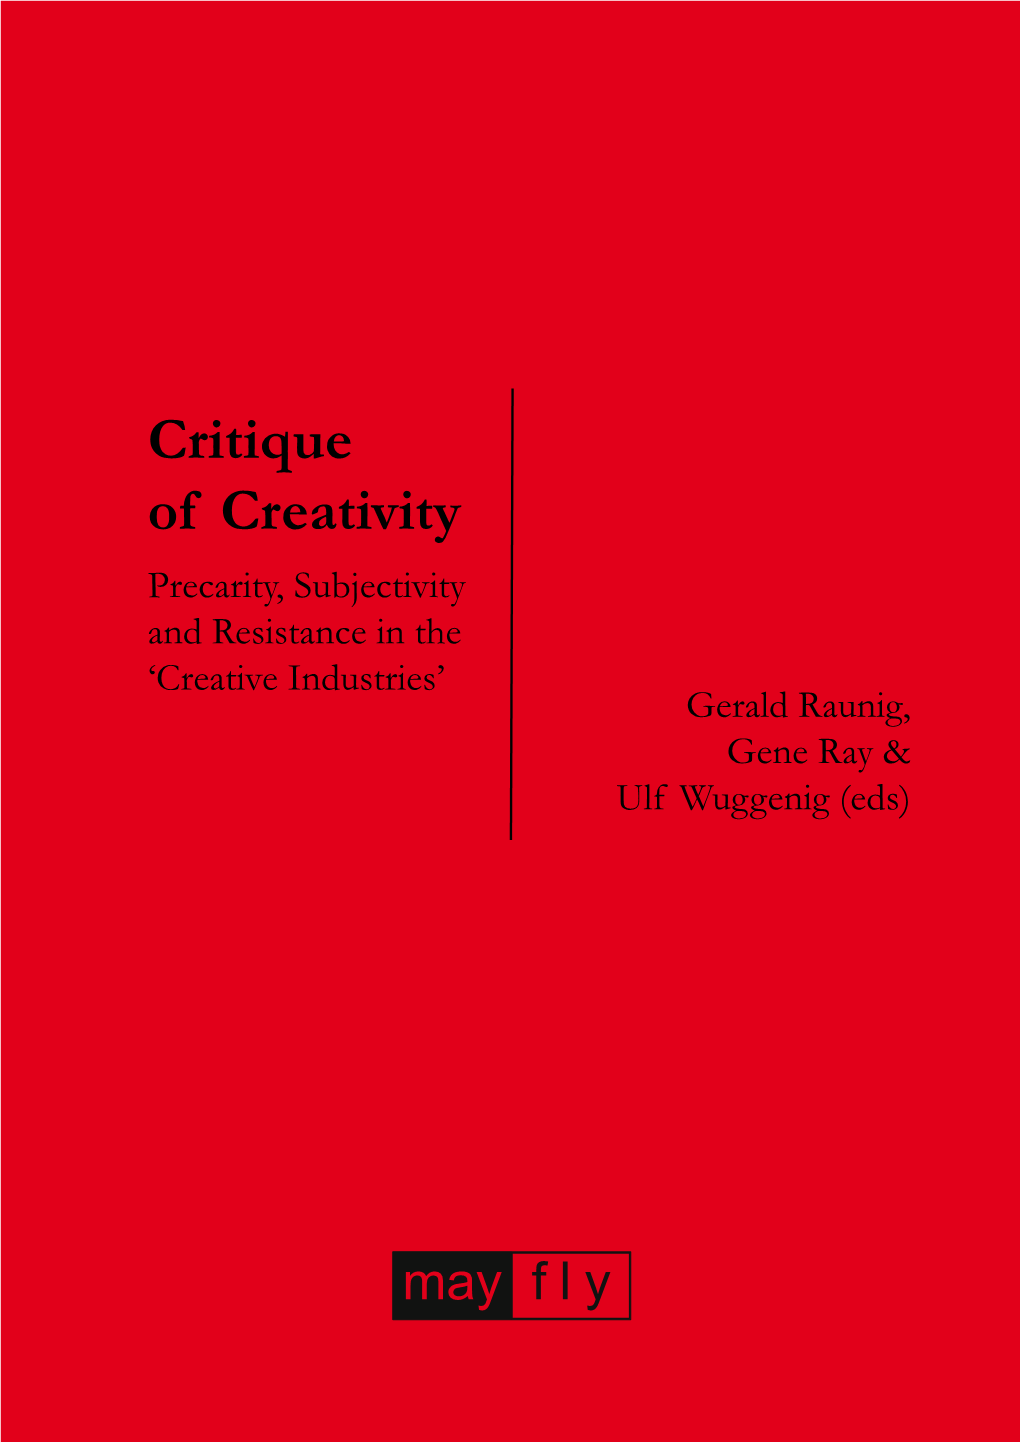 Critique of Creativity Precarity, Subjectivity and Resistance in the ‘Creative Industries’ Gerald Raunig, Gene Ray & Ulf Wuggenig (Eds)